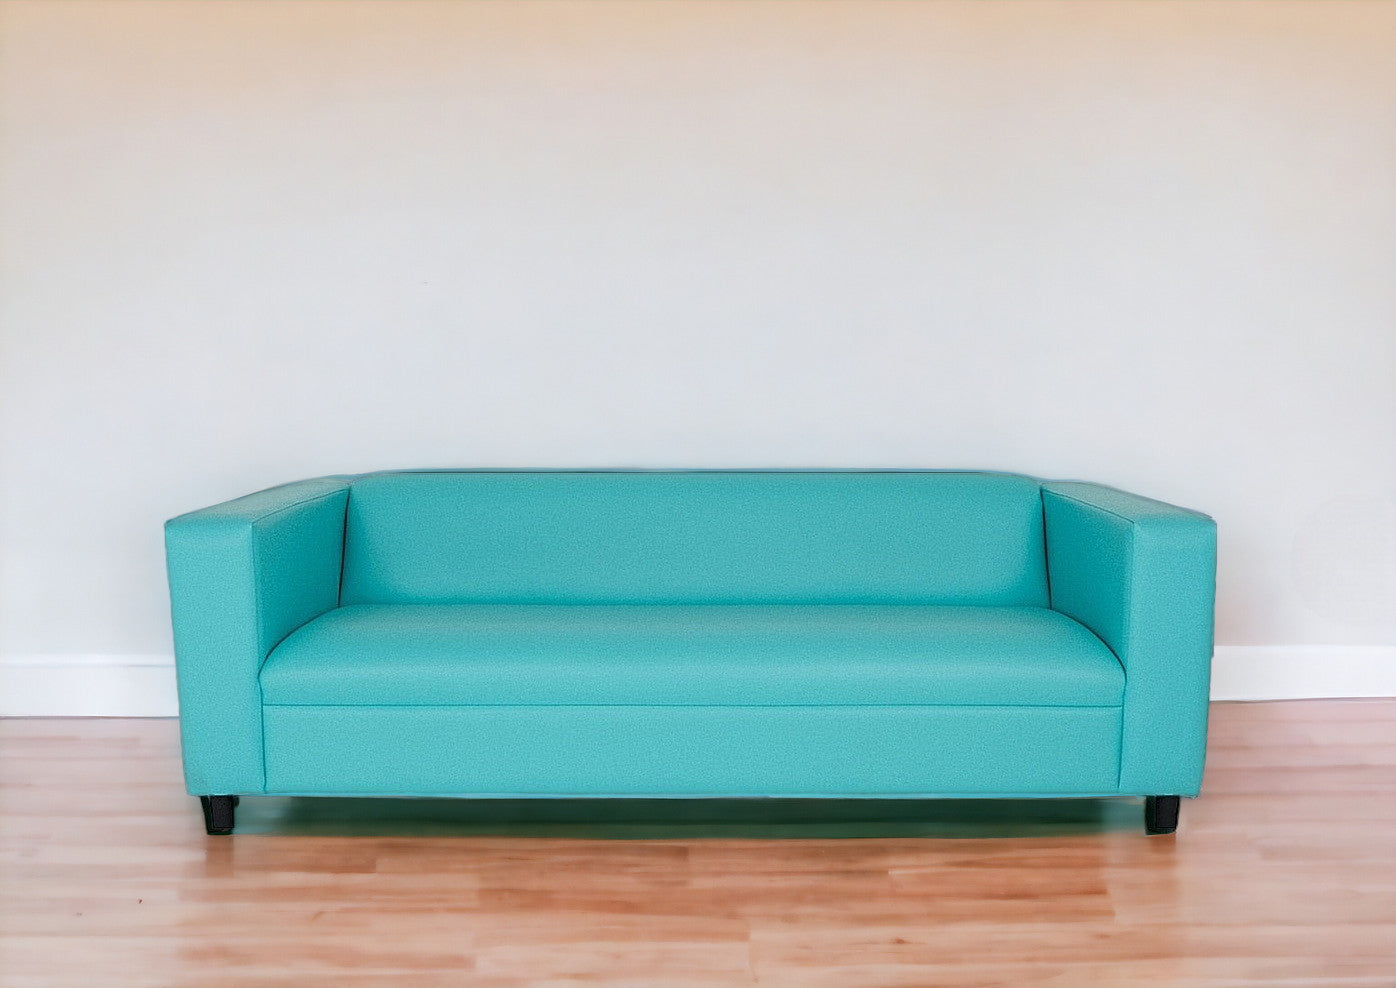 84" Teal Blue Faux Leather Sofa With Black Legs